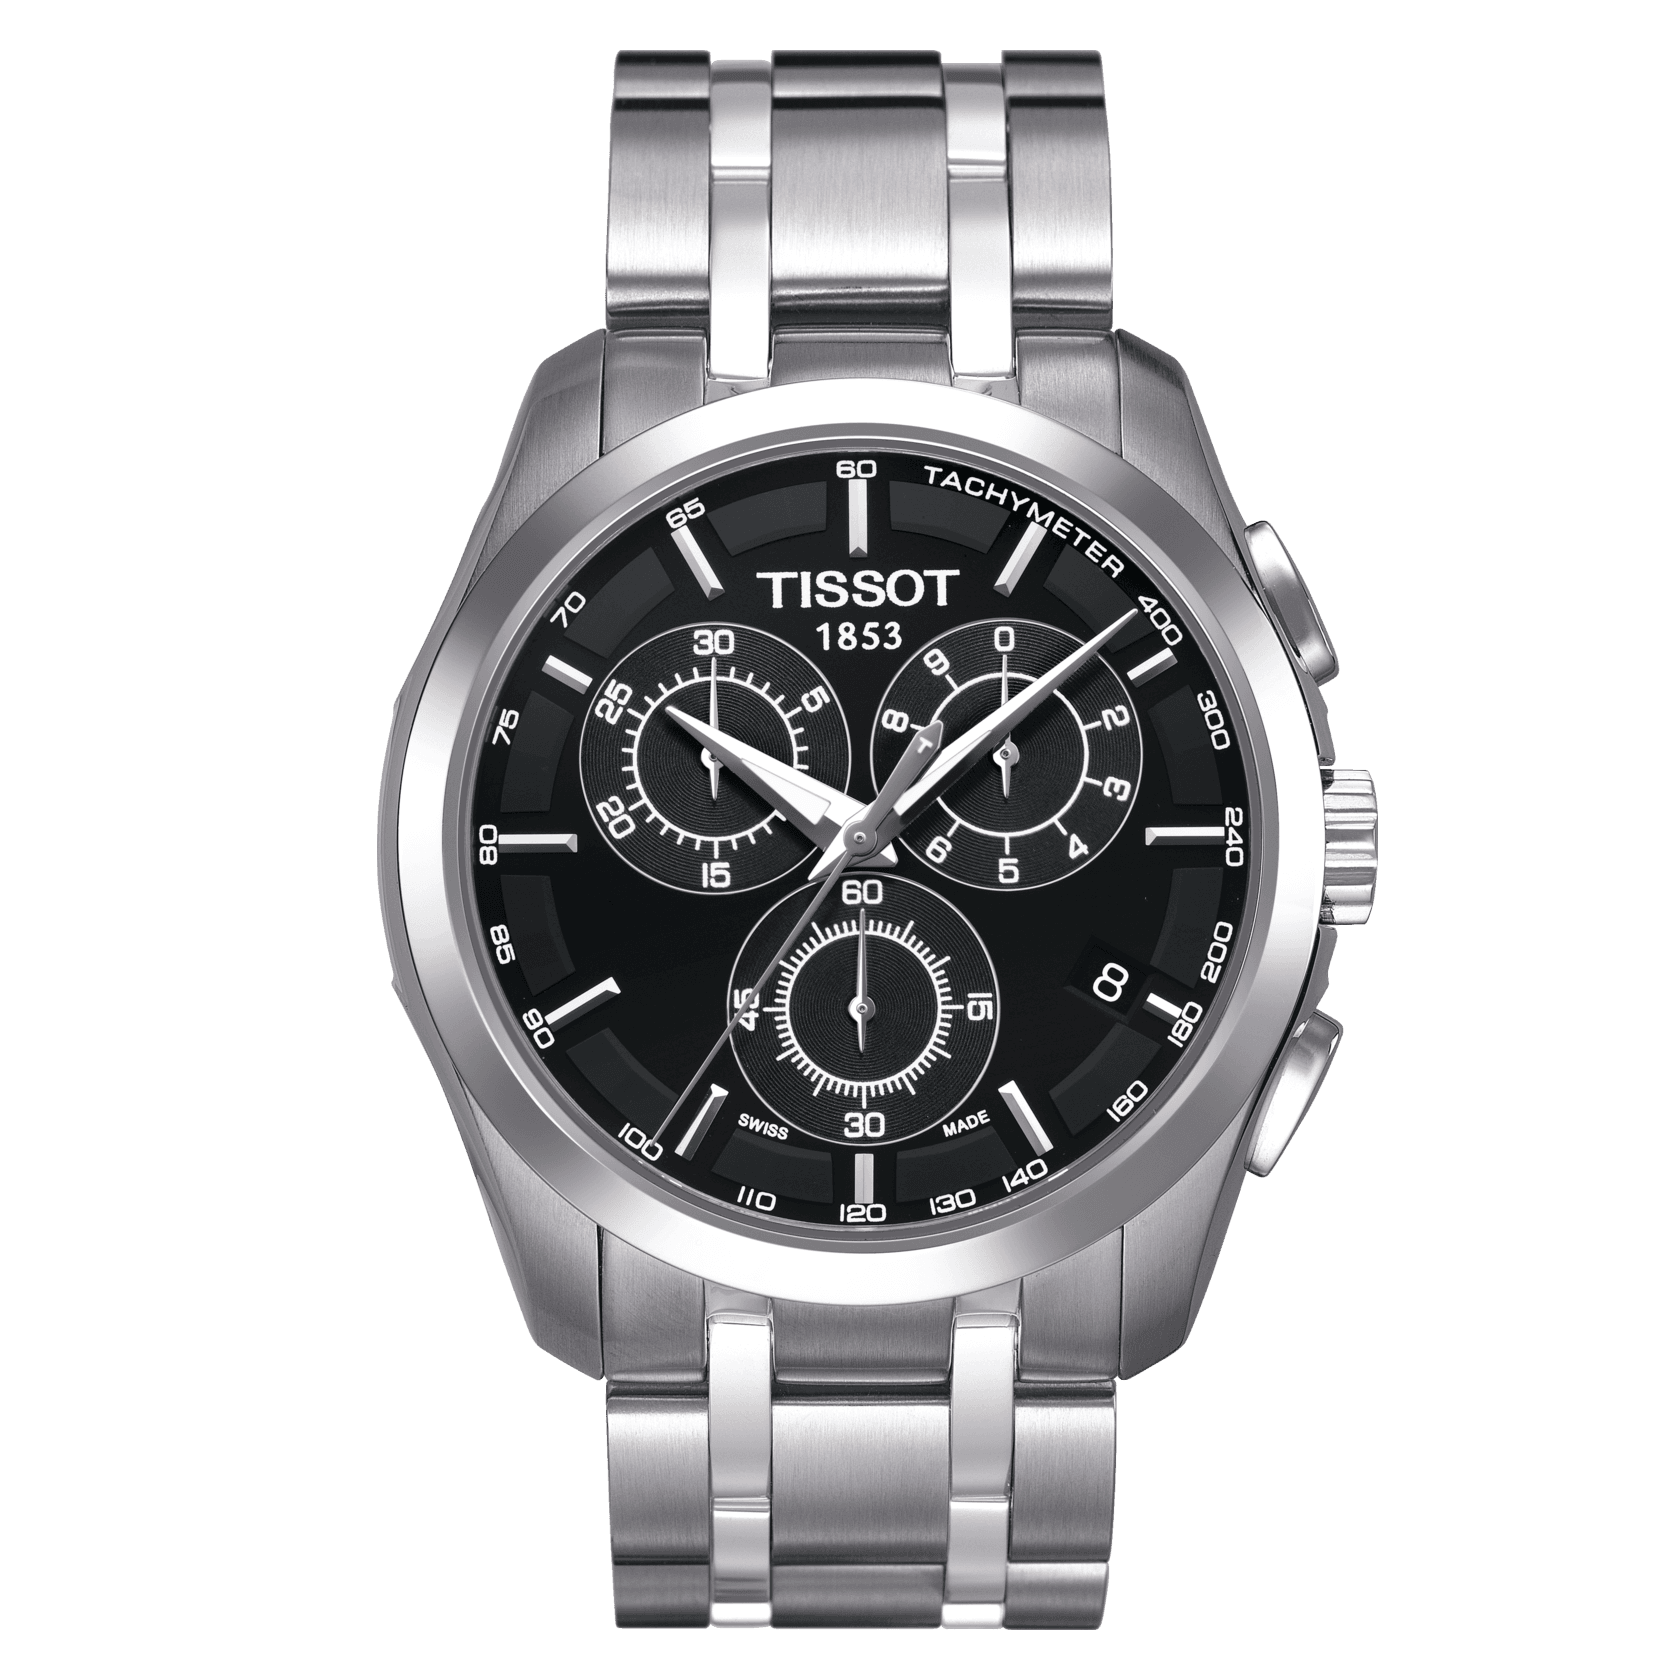 Tissot Couturier Chronograph Men's Watch - Kamal Watch Company